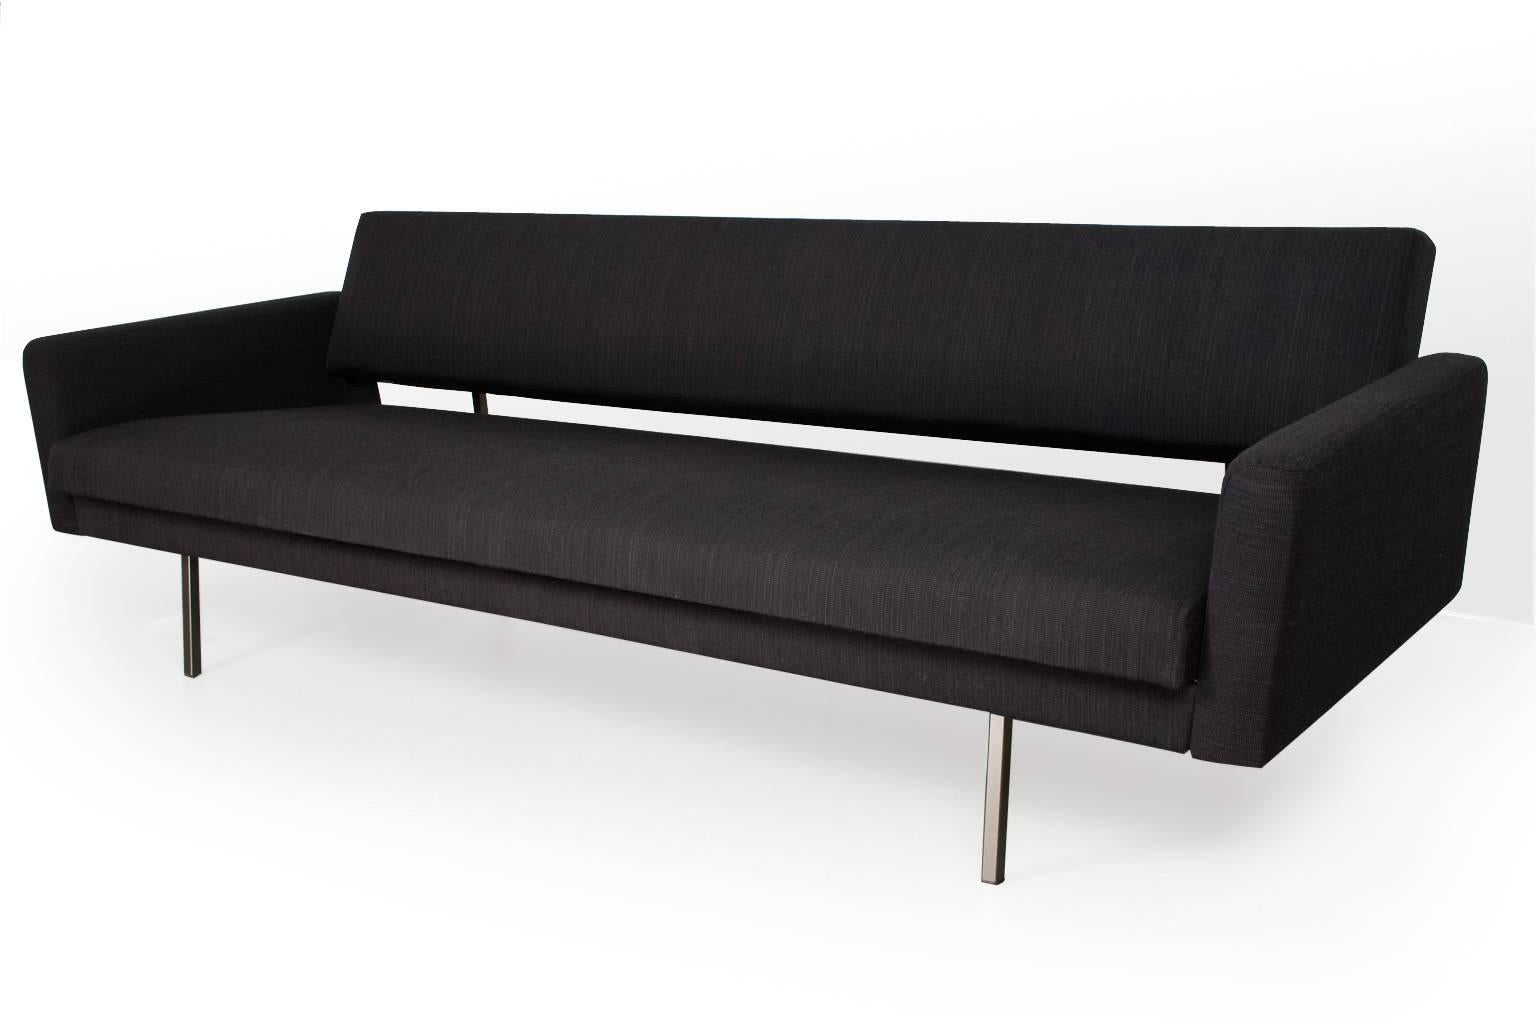 Original Rob Parry Lotus 65 with upholstered armrests on a grey lacquered metal frame, designed by Rob Parry for the Dutch editor Gelderland in the 1960s. The sofa is new upholstered in dark brown and black melange De Ploeg furniture fabric. The